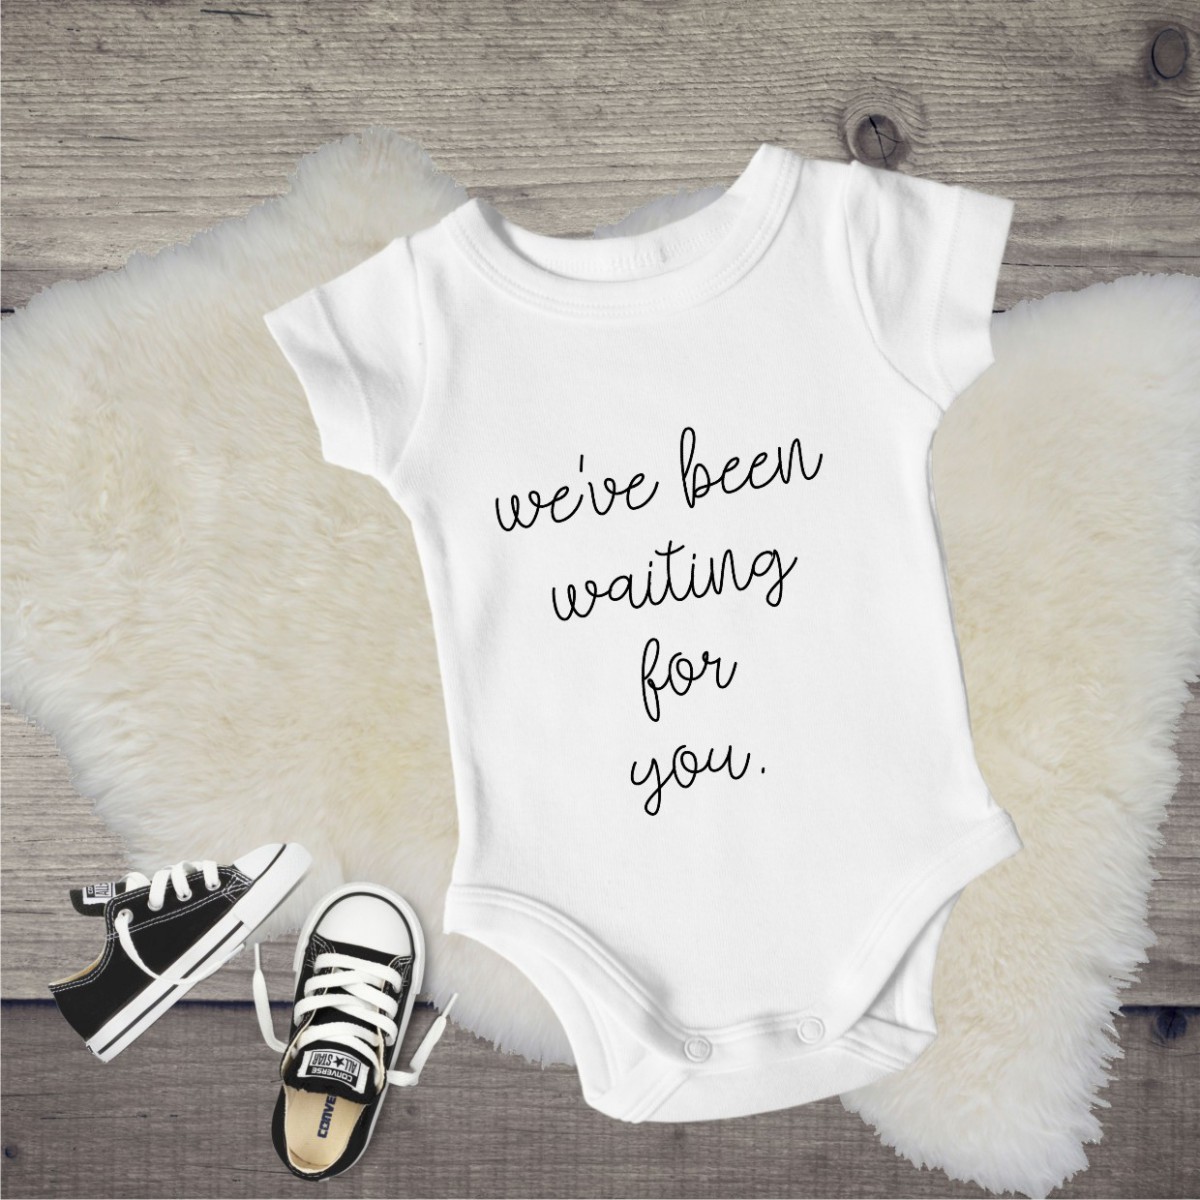 Baby　For　You!　Onesie　It　We've　It　been　for　waiting　you　Personalize　Personalize　For　You!